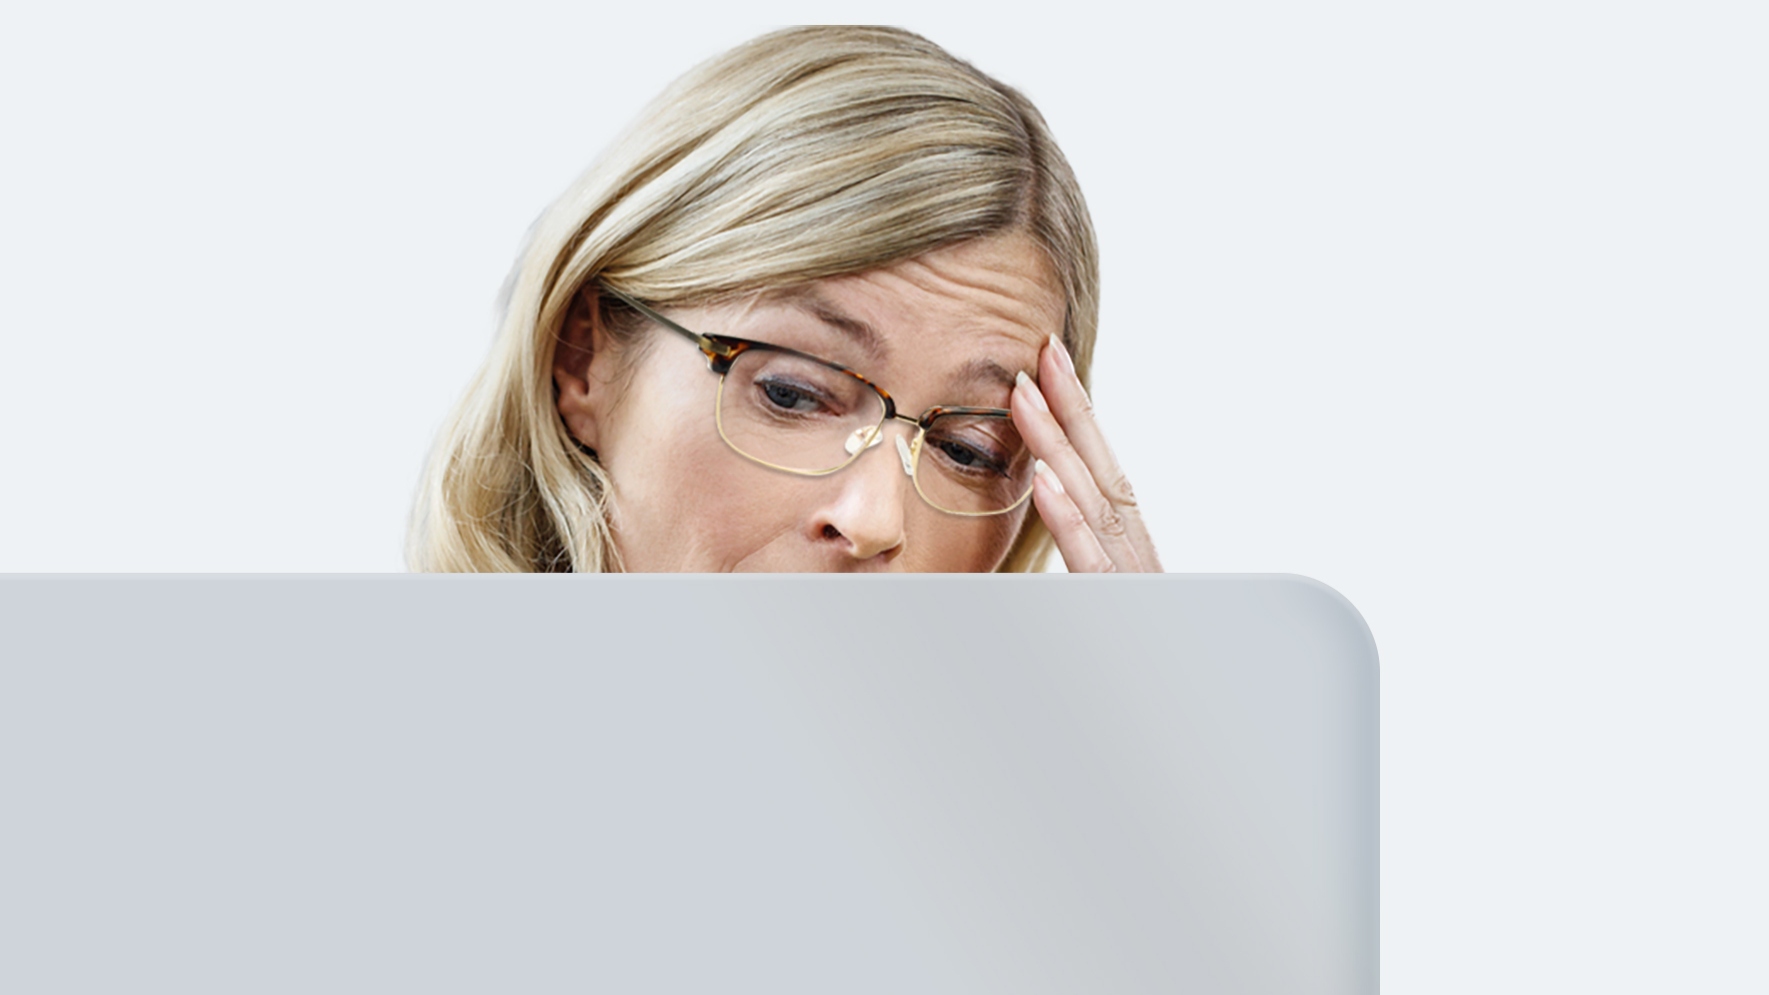 A middle-aged woman with long blonde hair wearing distance glasses is experiencing eyestrain because her lenses are not made for staring at a screen all day.